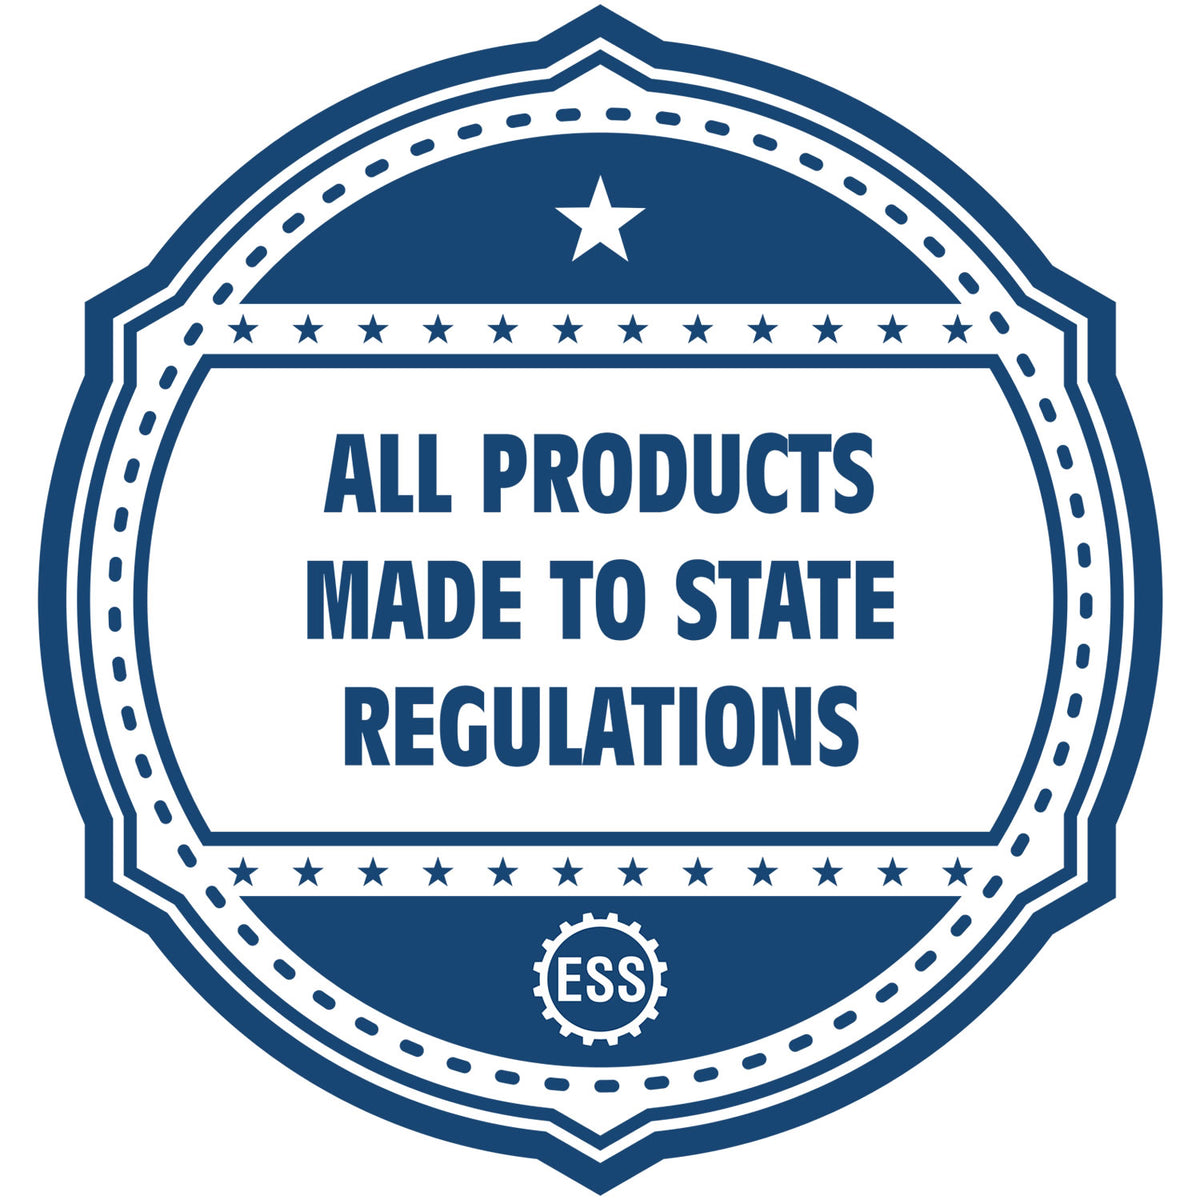 A blue icon or badge for the Heavy Duty Cast Iron Massachusetts Geologist Seal Embosser showing that this product is made in compliance with state regulations.